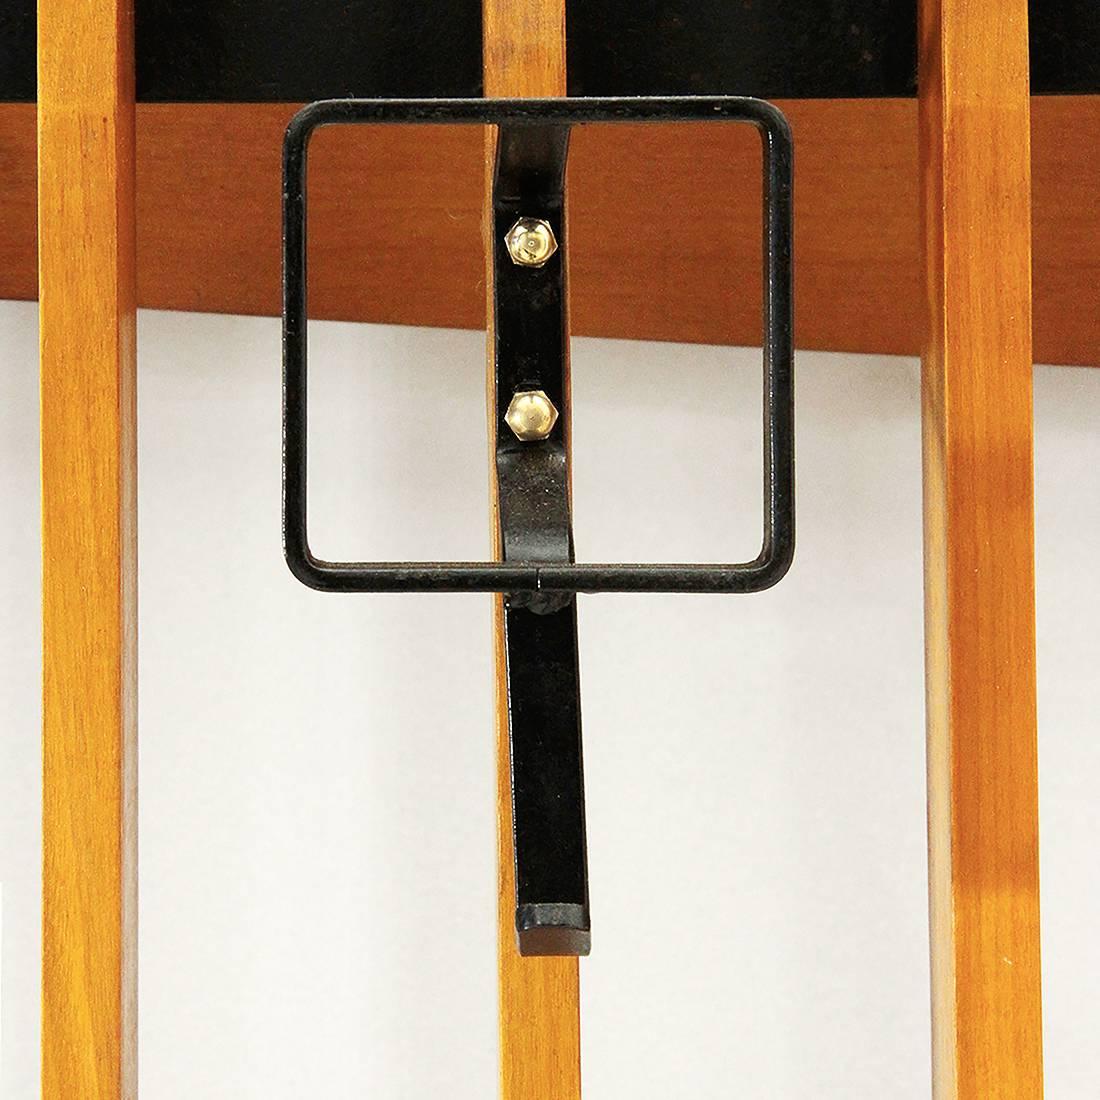 Metal Coat Hanger of Italian Manufacture Produced in the 1950s